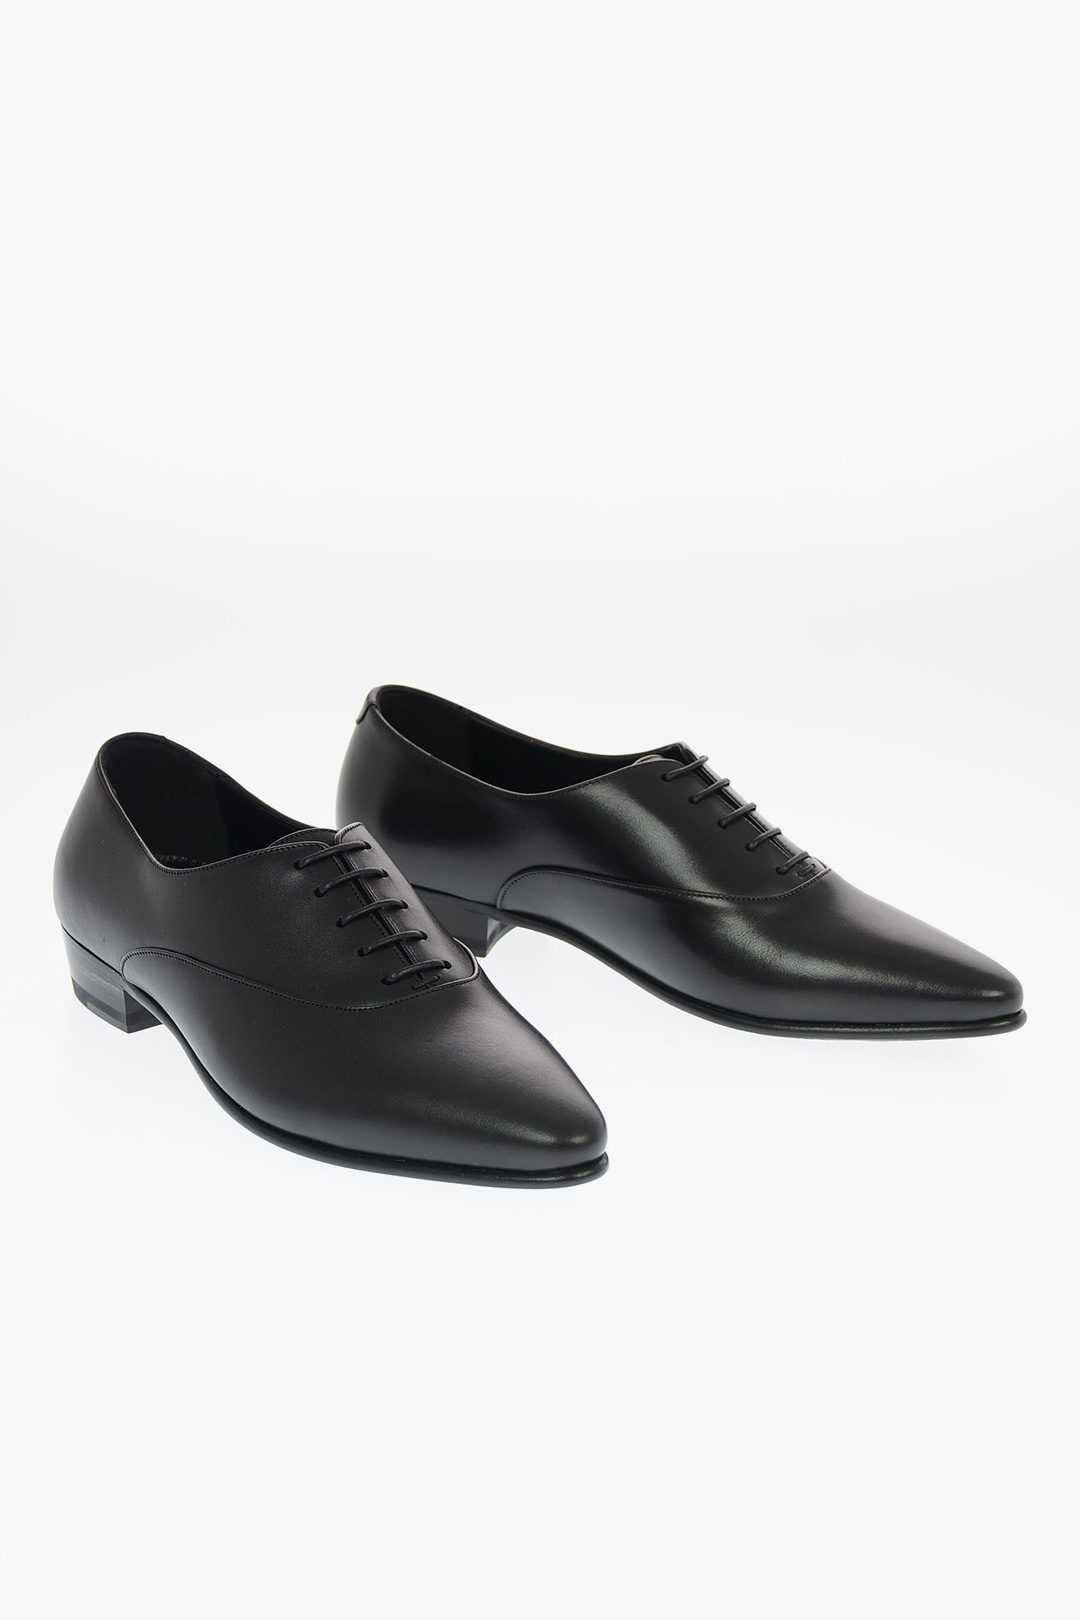 Fatal I have an English class Carrot Celine Leather Oxford Shoes men - Glamood Outlet